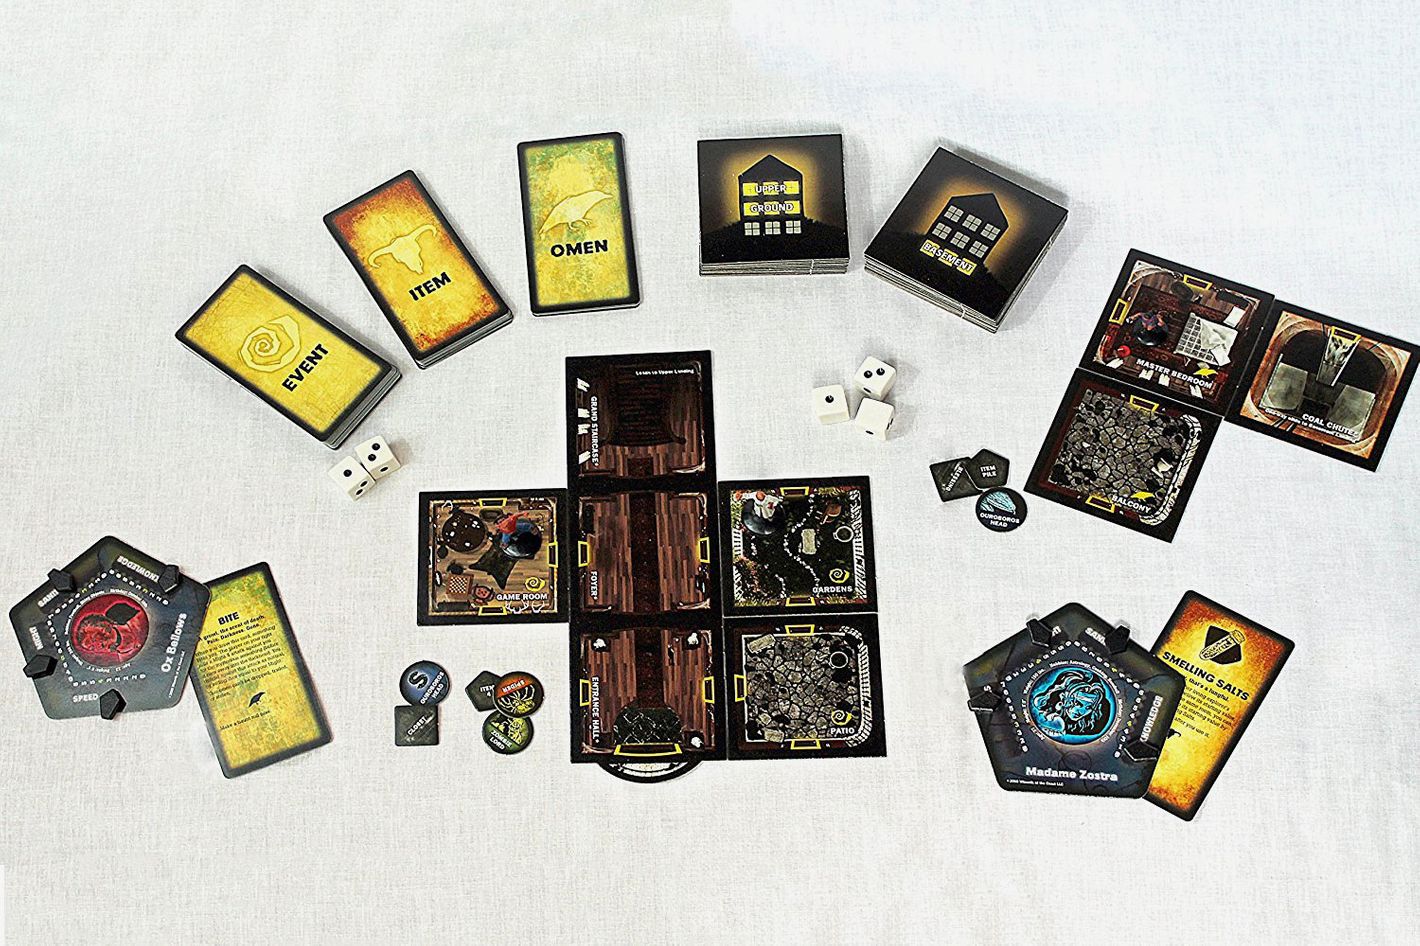 Ghastly Games for Your Halloween Game Night - One Board Family